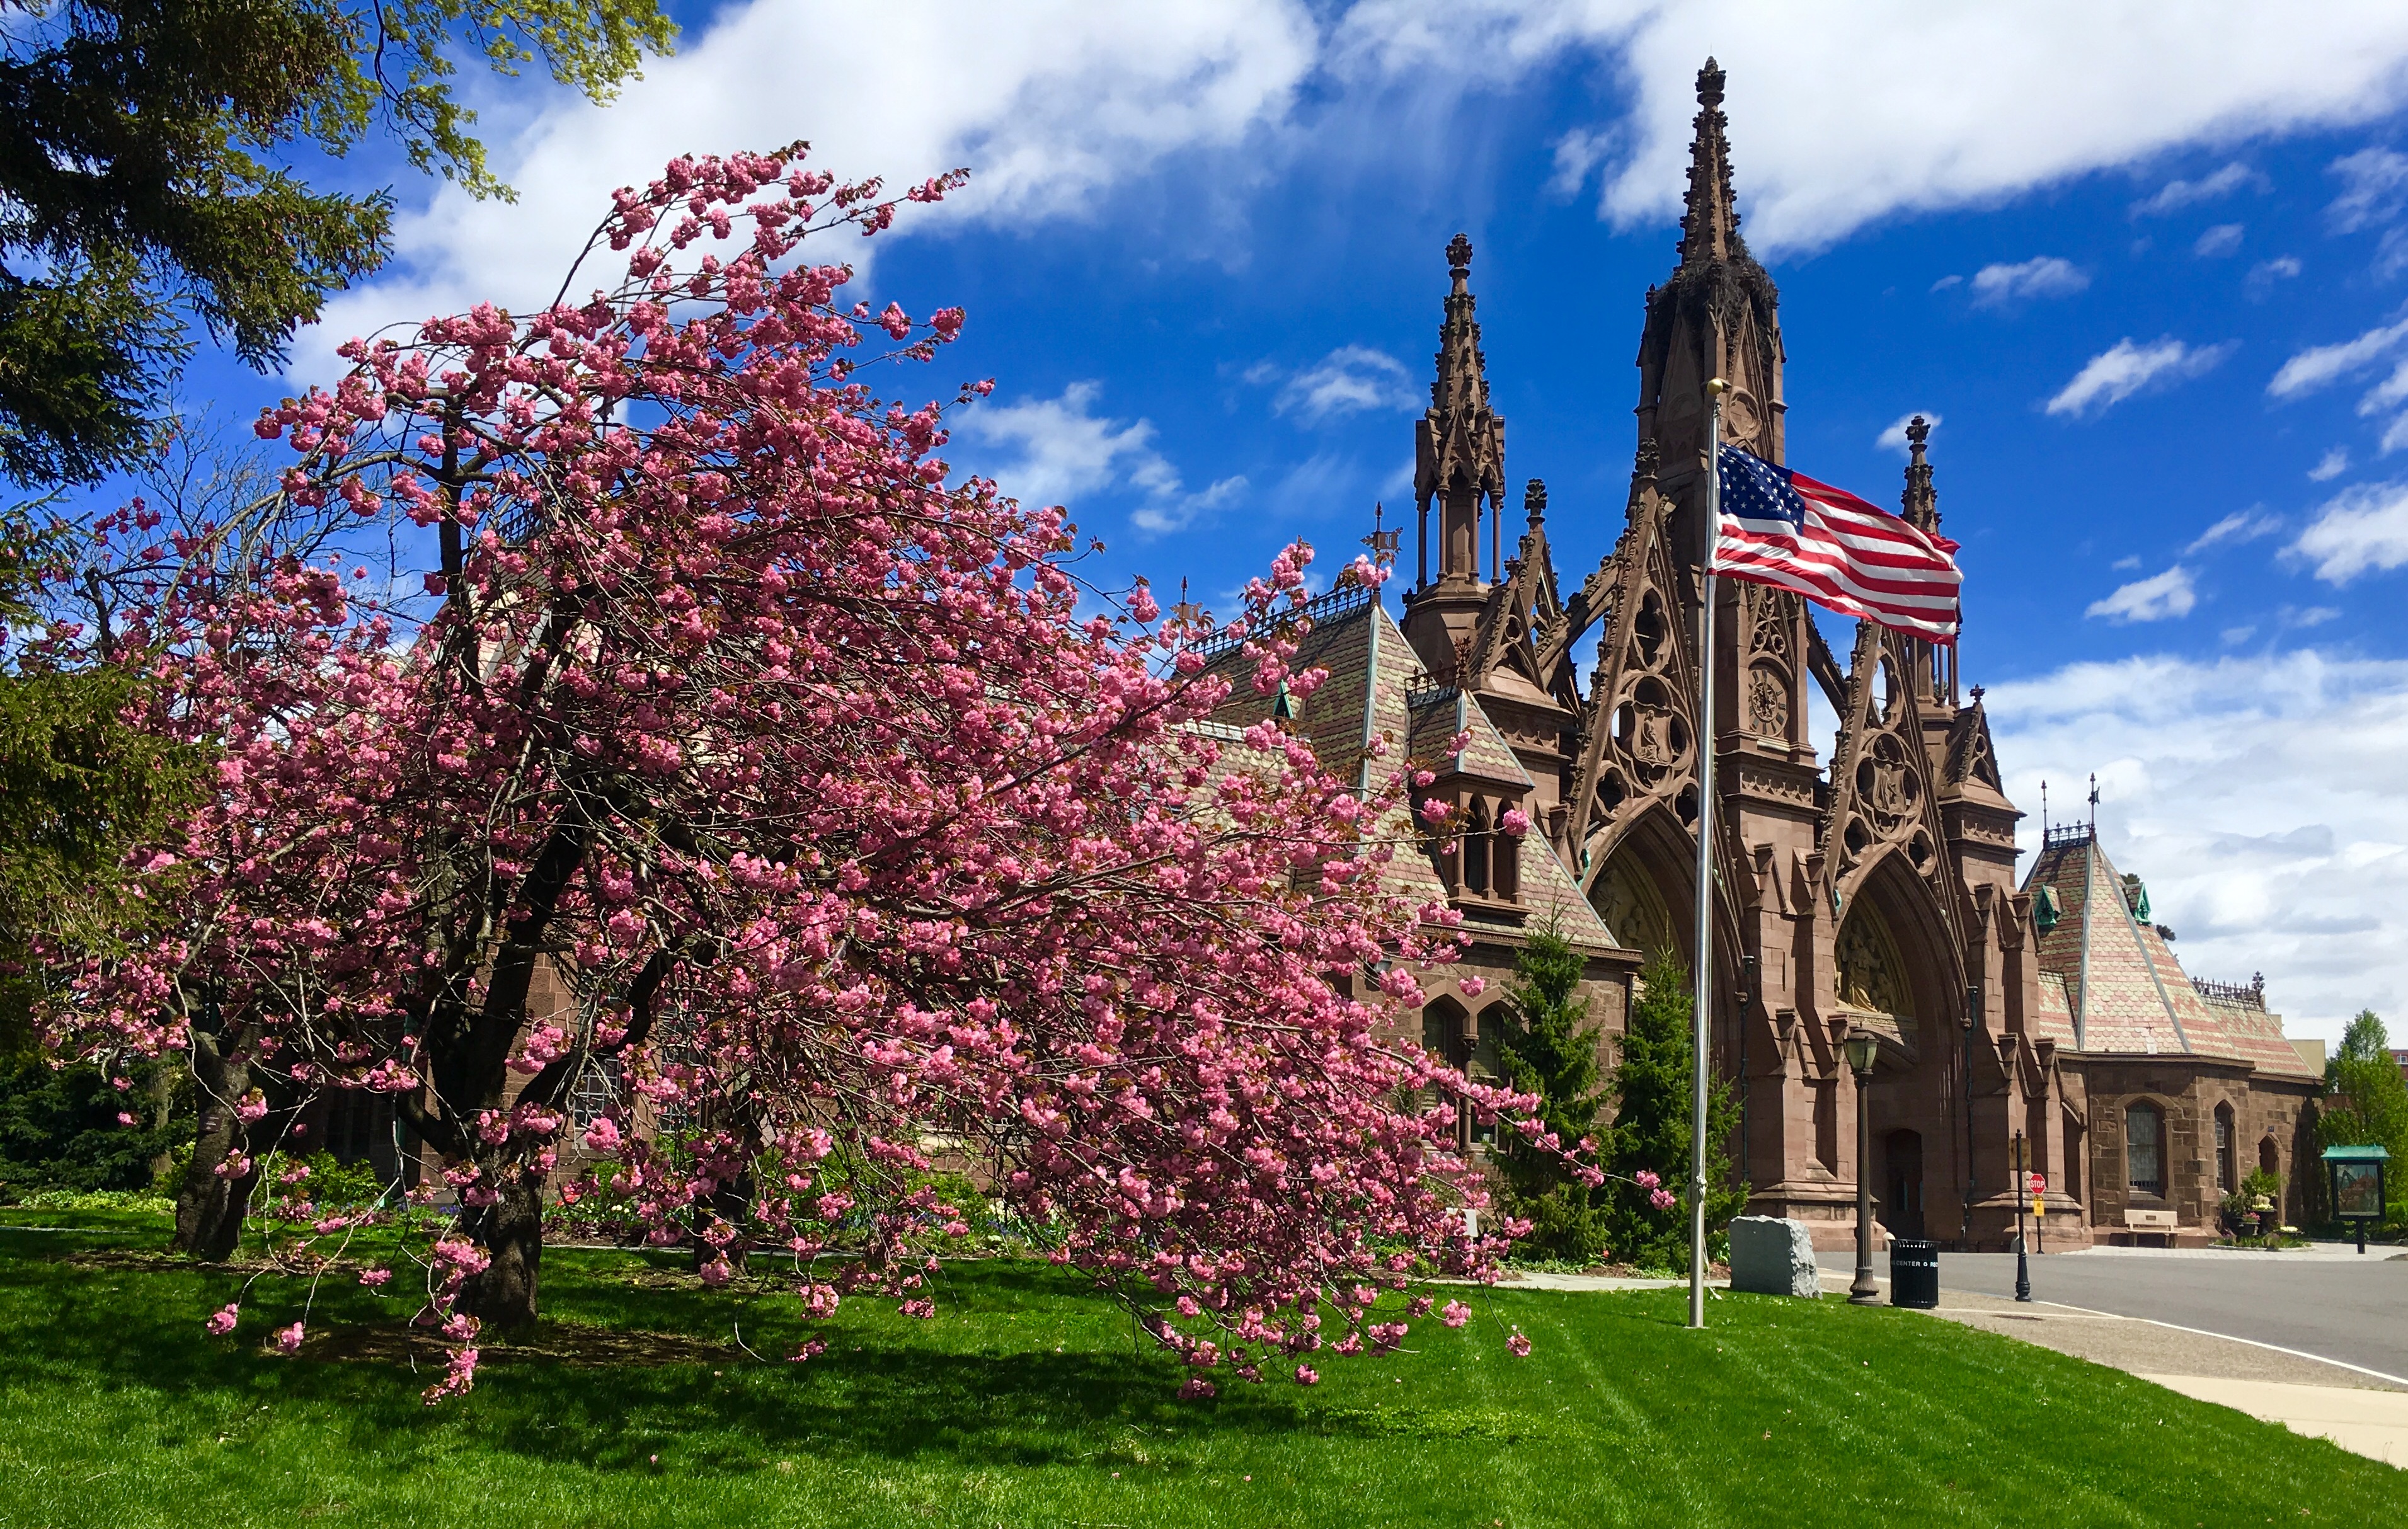 You know spring has really arrived in Brooklyn when the cherry trees blossom beside Green-Wood Cemetery’s landmarked gateway. Eagle photo by Lore Croghan